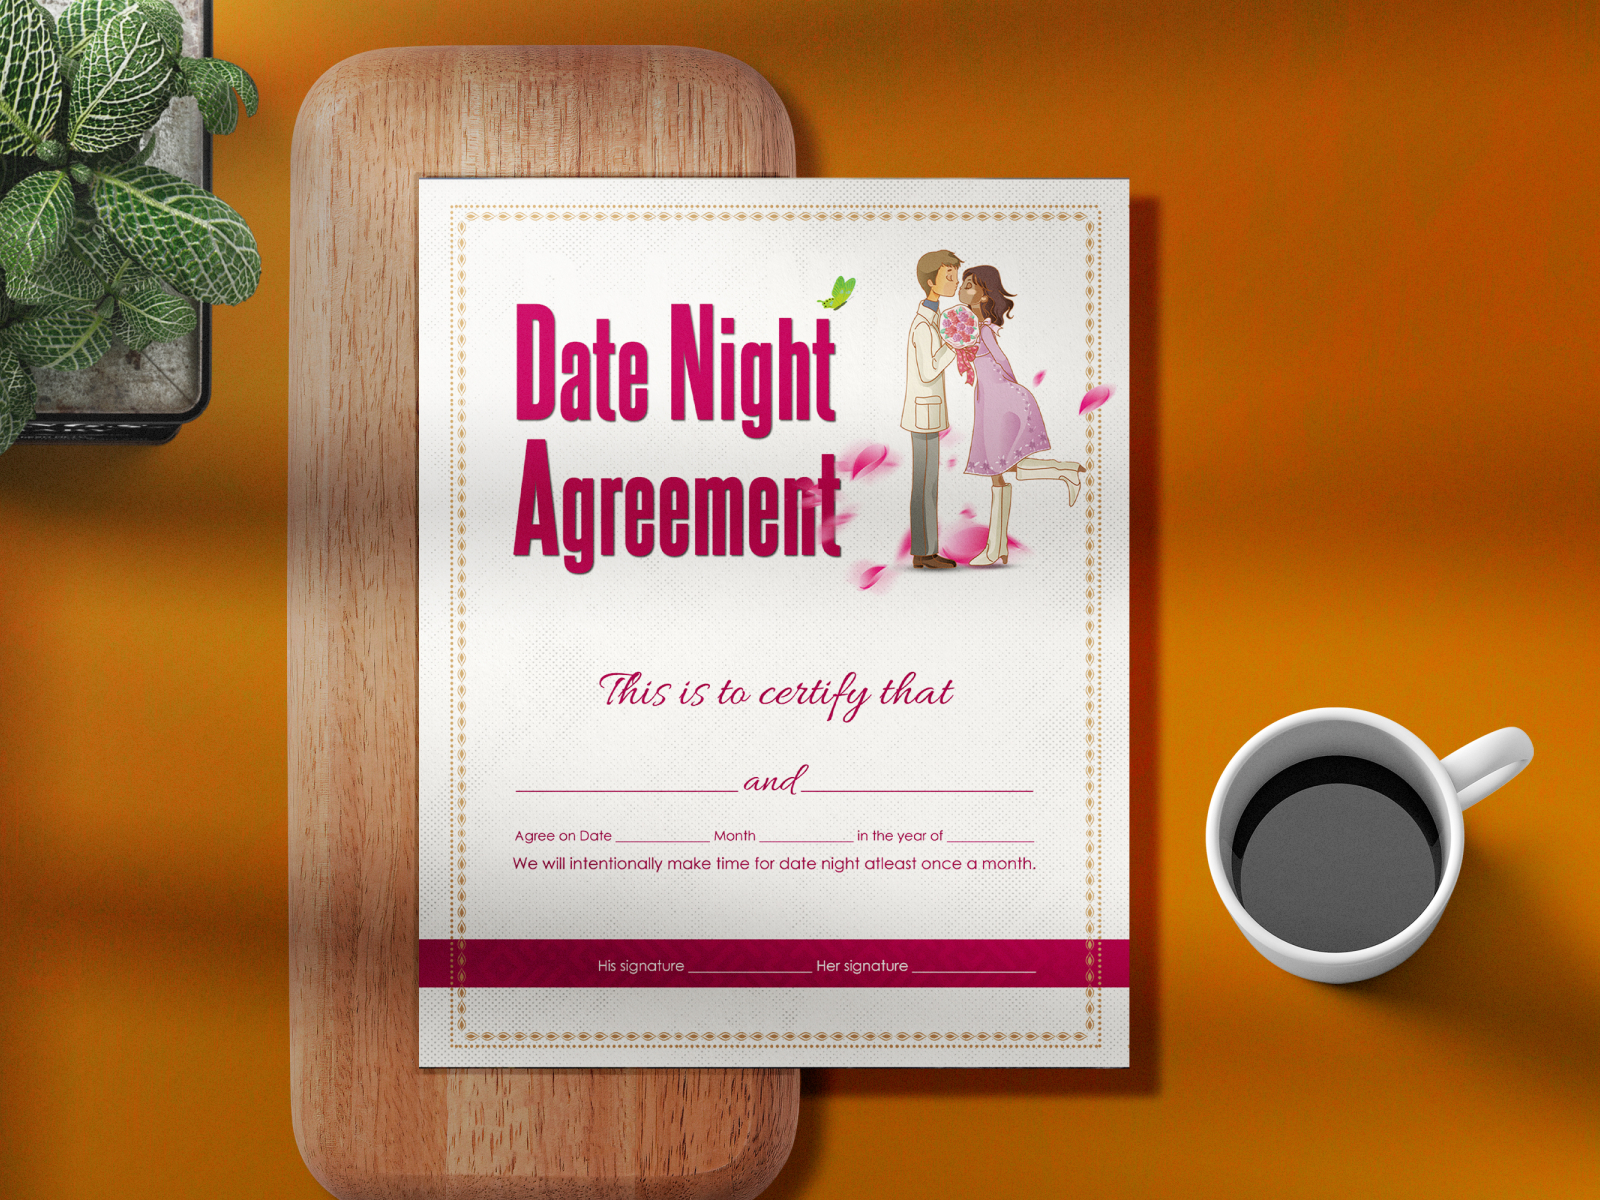 Date Night Couple Agreement certificate by Creative Hivee 🏆 on Dribbble